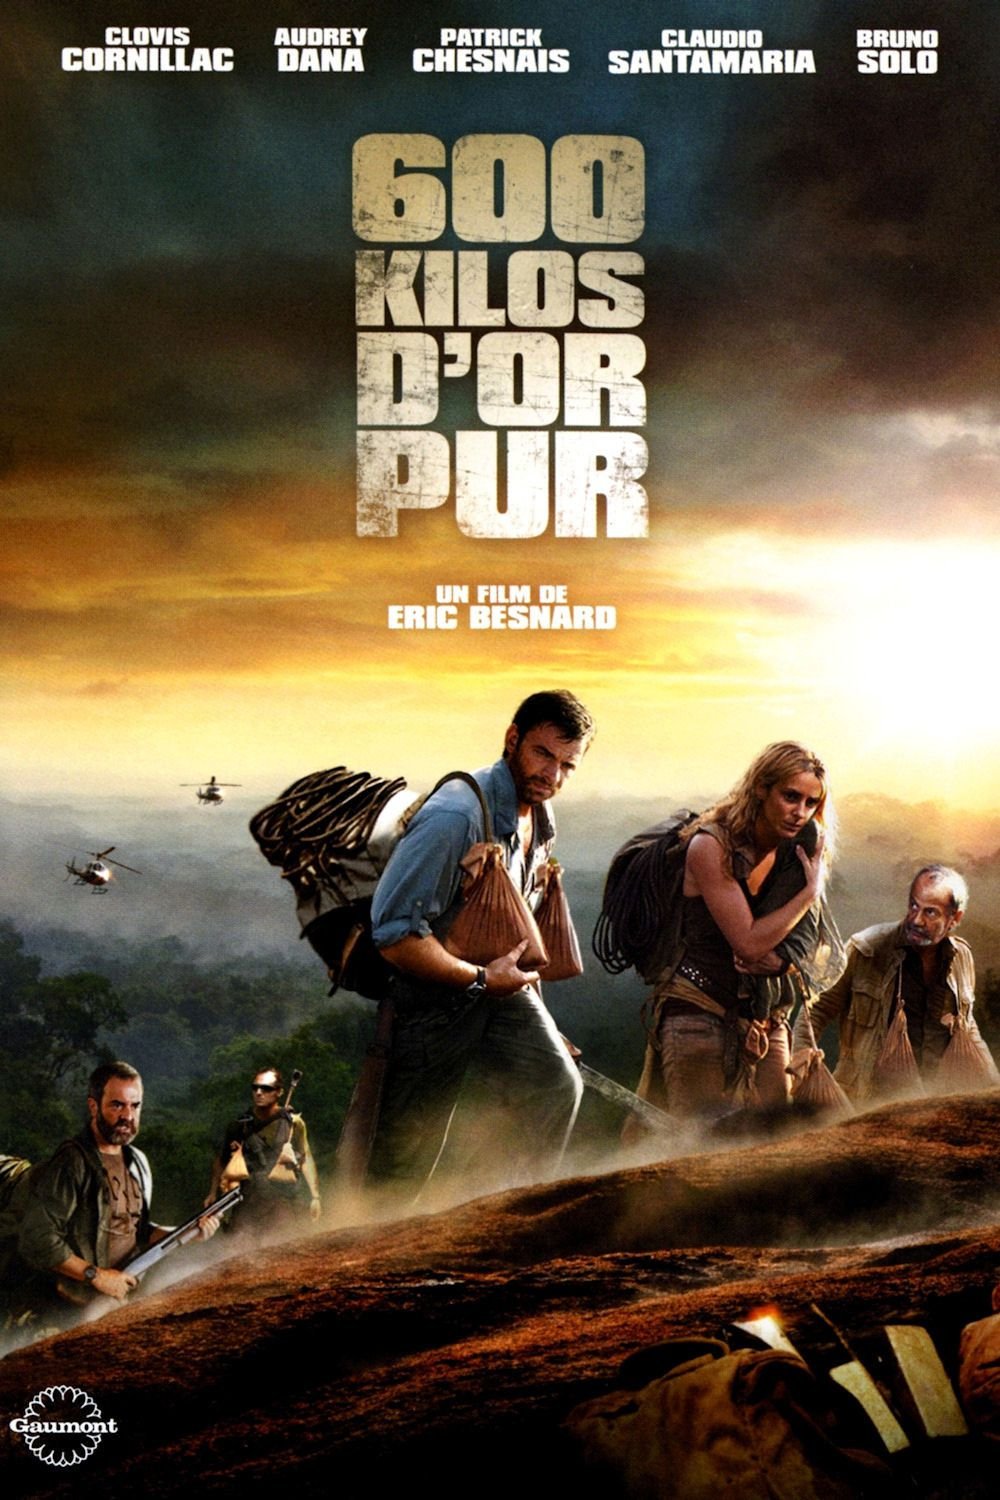 Poster of the movie 600 kilos d'or pur